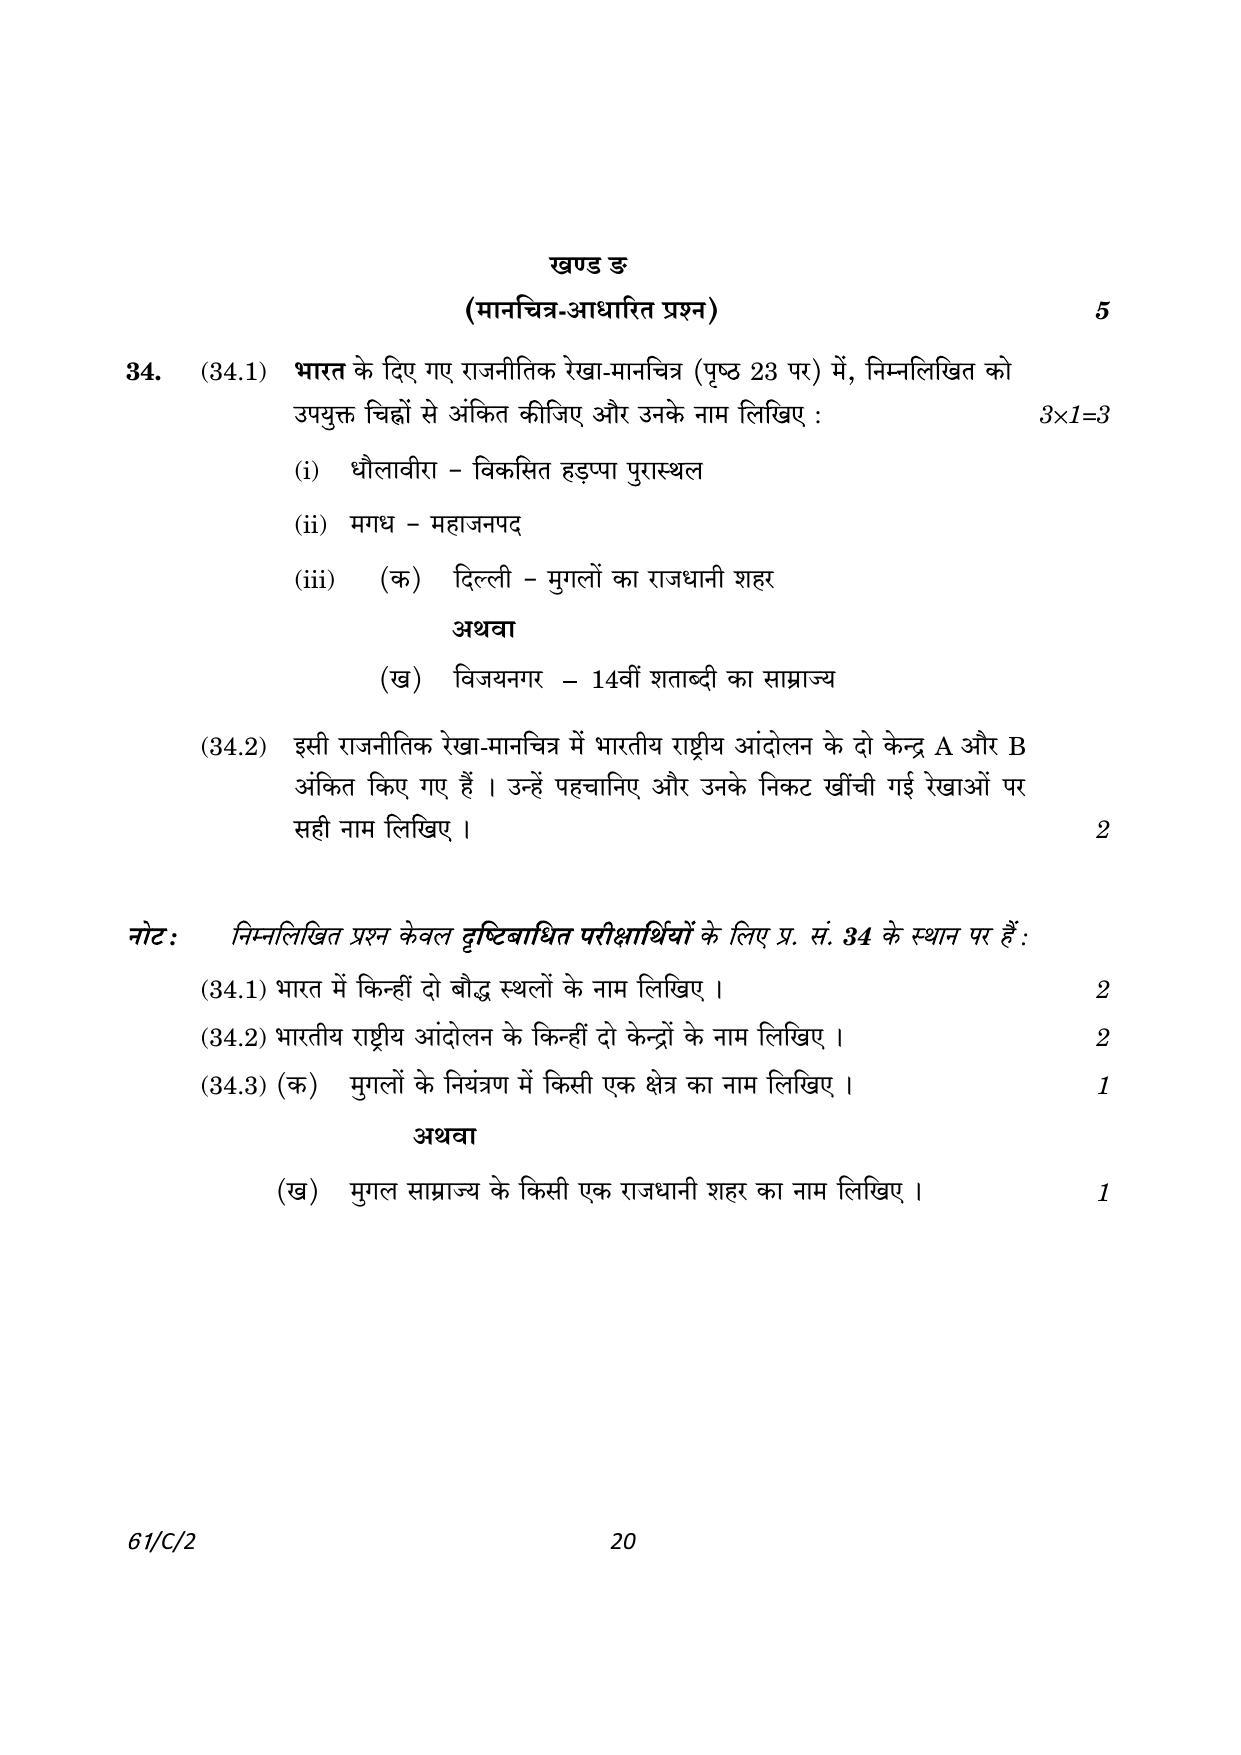 CBSE Class 12 61-2 History 2023 (Compartment) Question Paper - Page 20